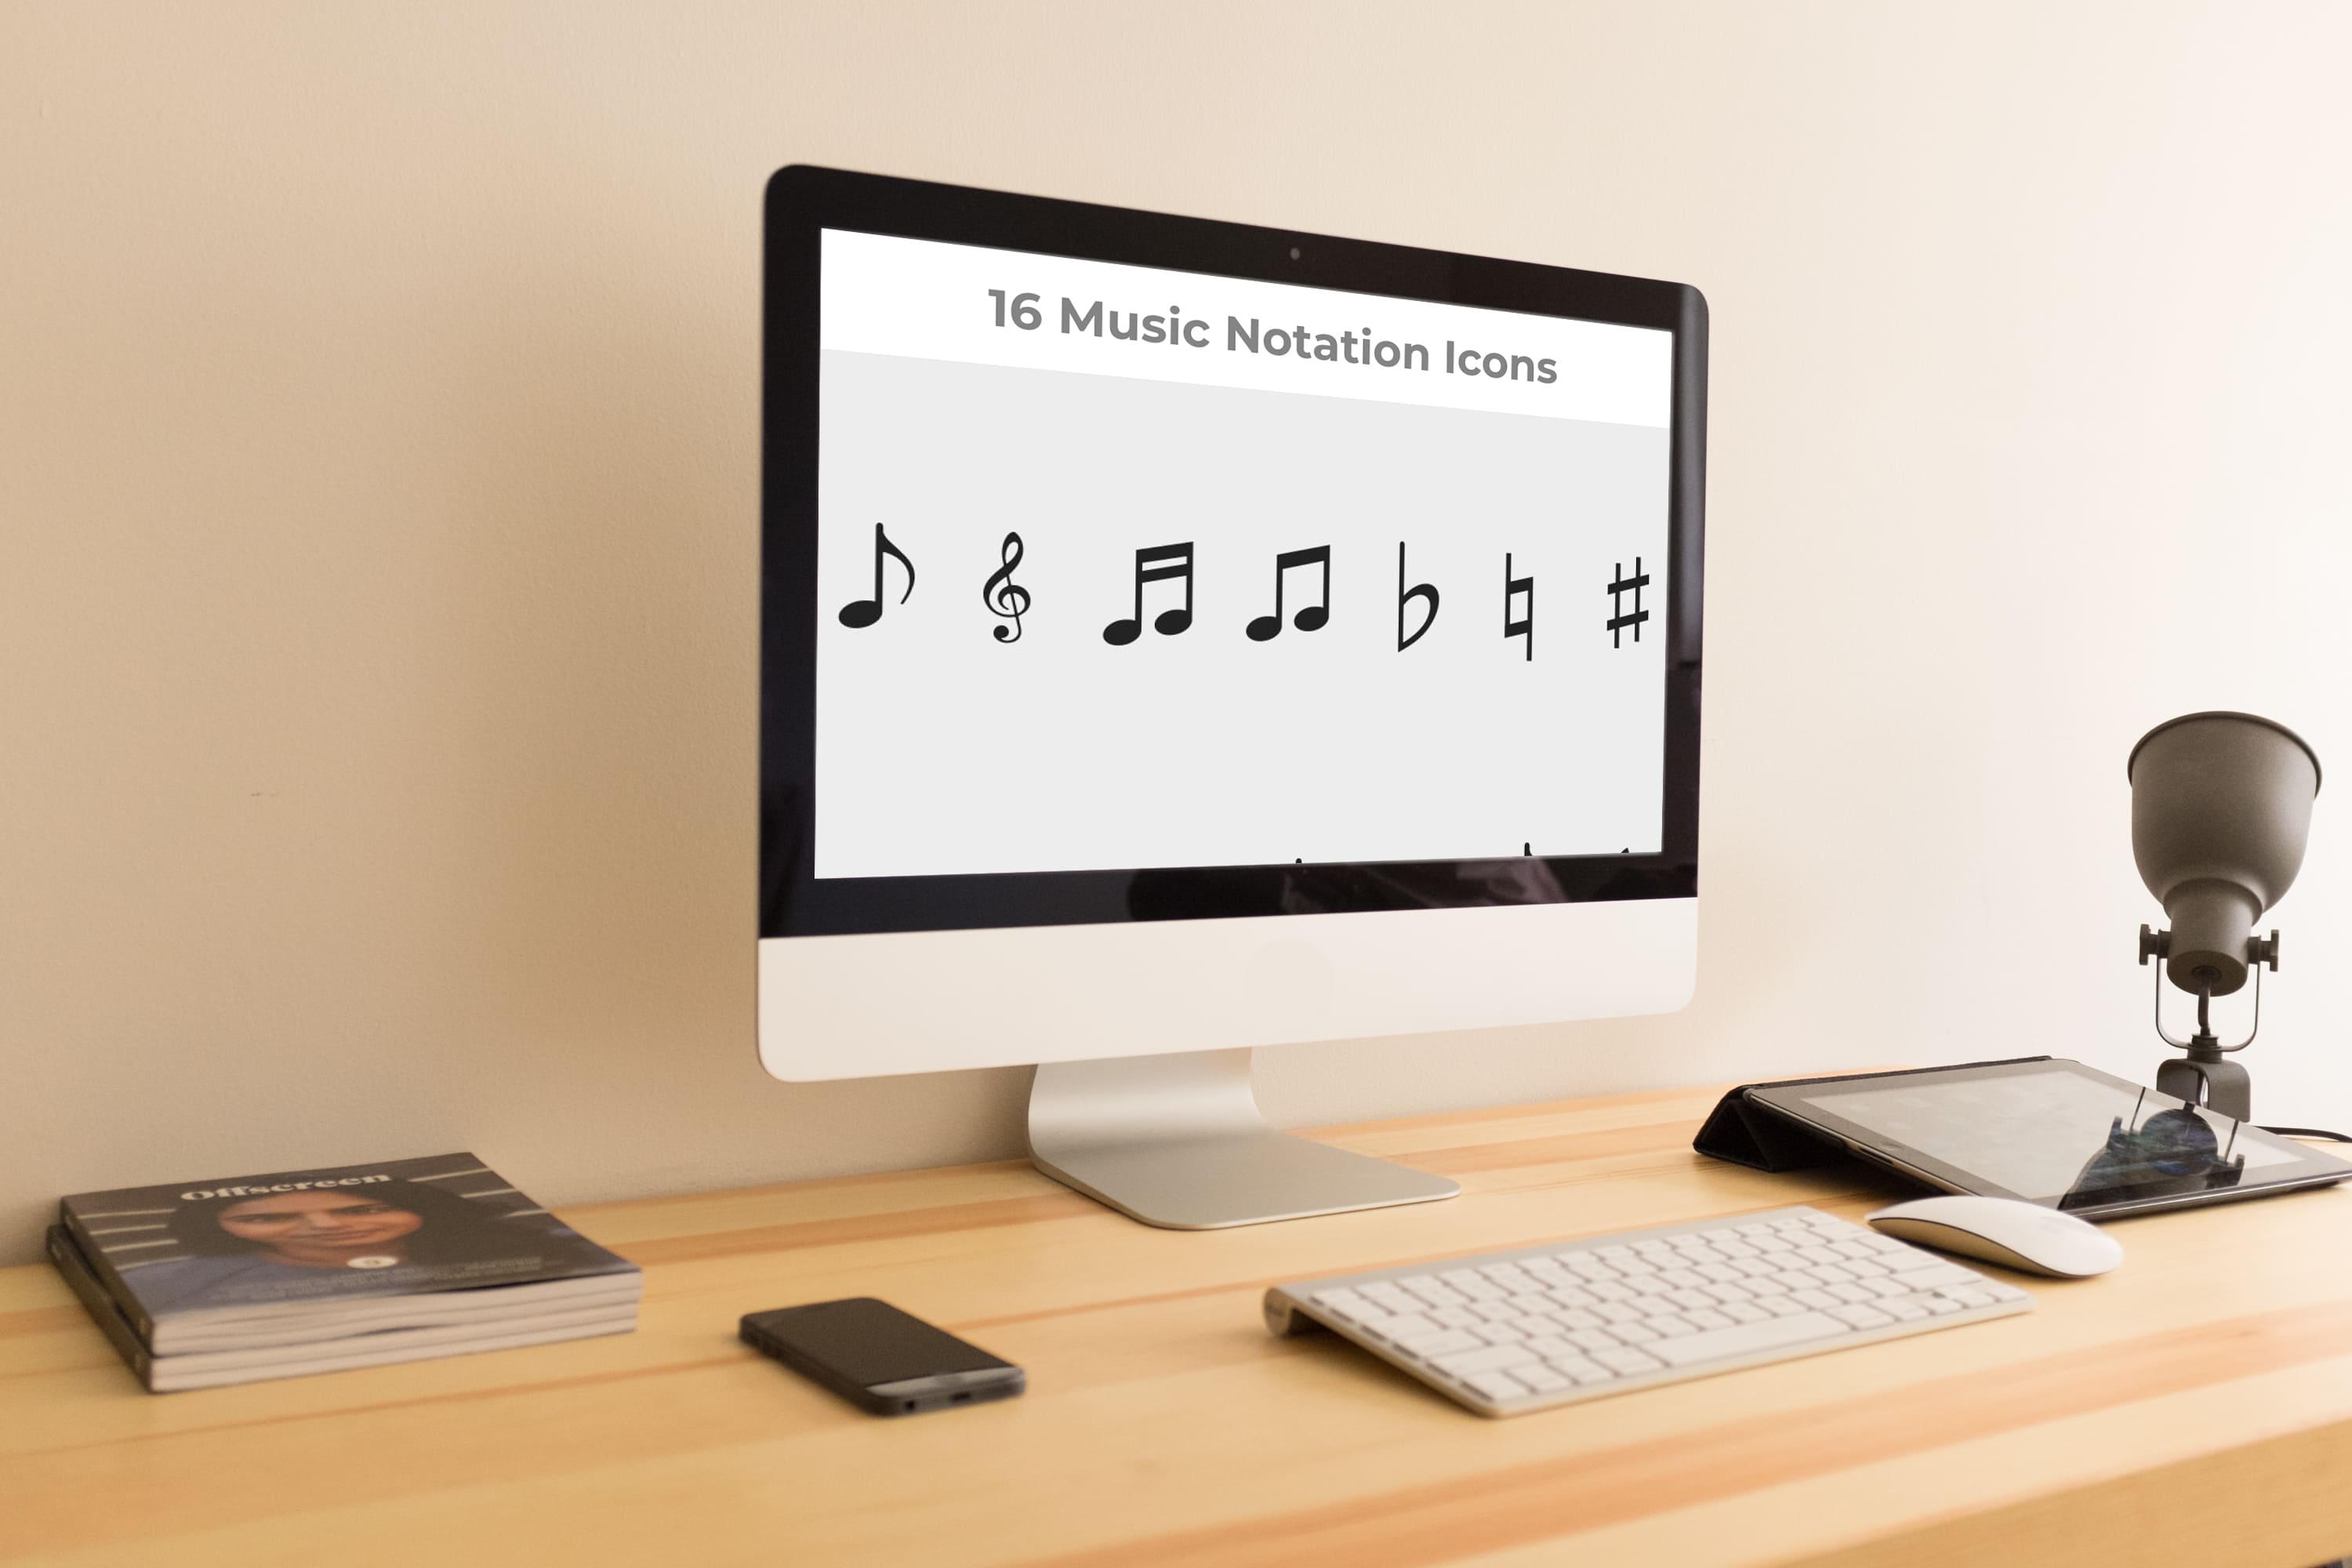 Desktop option of the 16 Music Notation Icons.